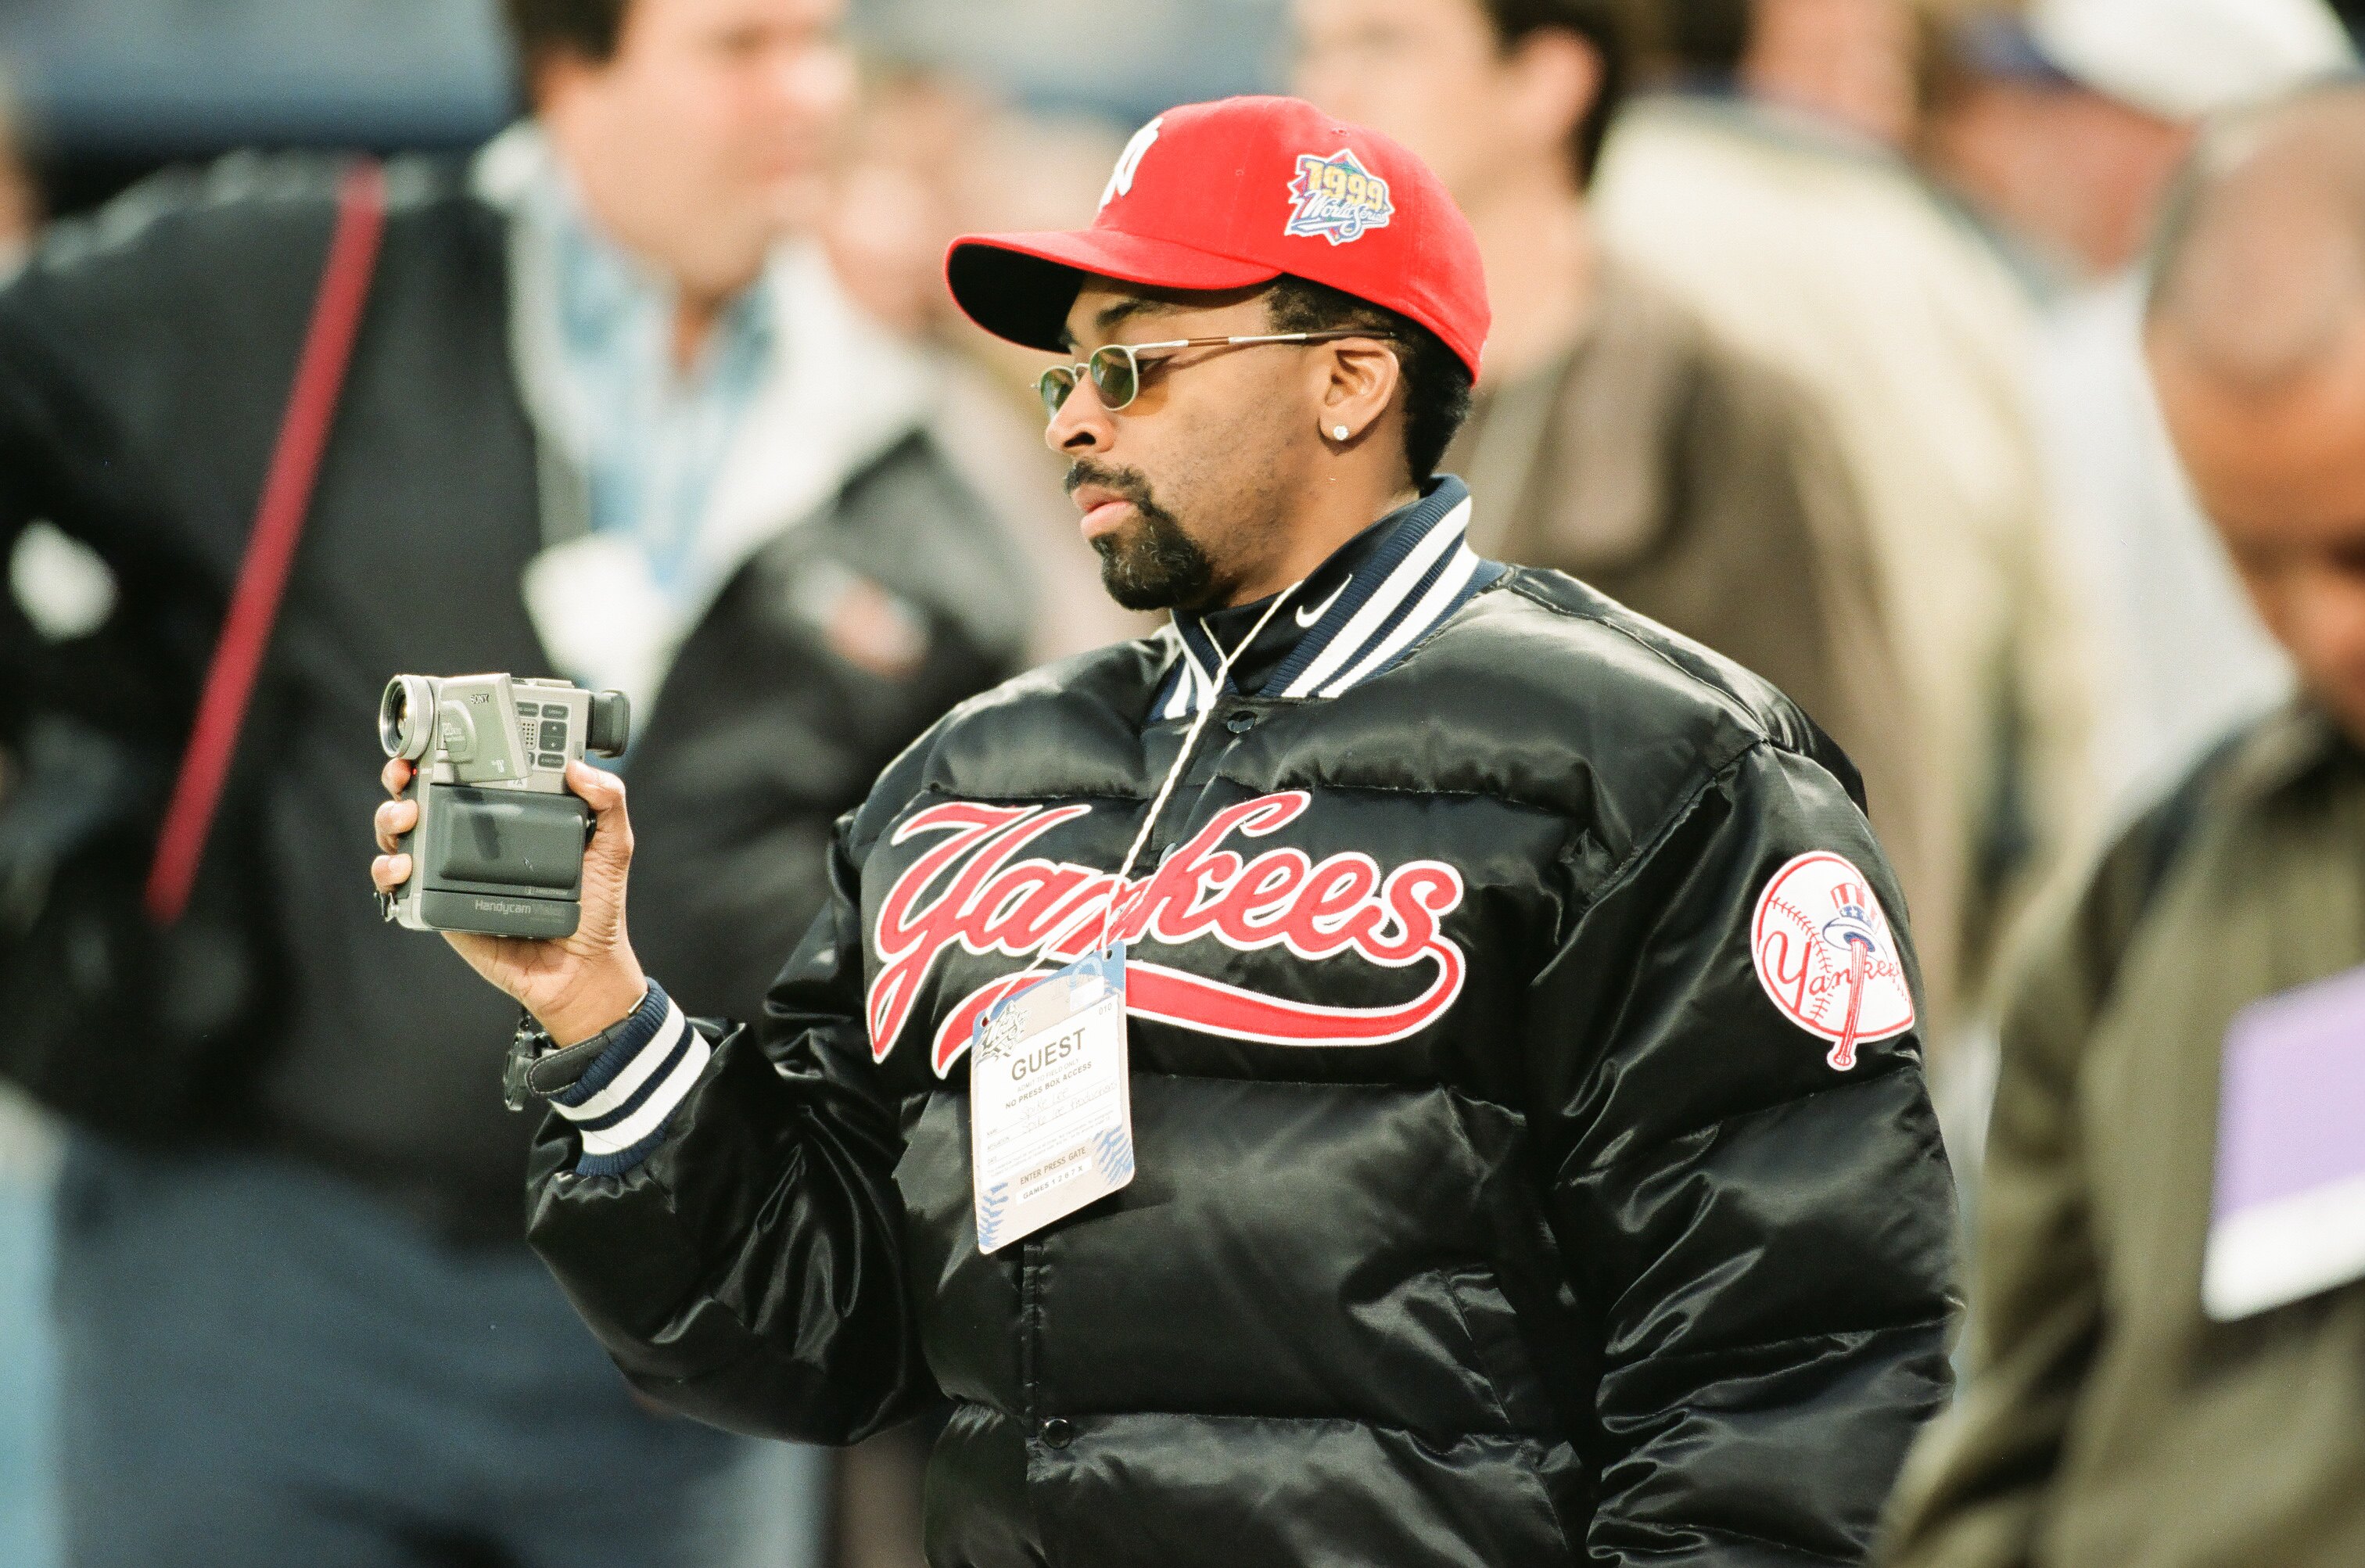 ATLANTA, GA - OCTOBER 23: Spike Lee prior to Game One of the World Series between the Atlanta Braves and the New York Yankees on October 23, 1999 at Turner Field in Atlanta, Georgia. (Photo by Sporting News via Getty Images via Getty Images)